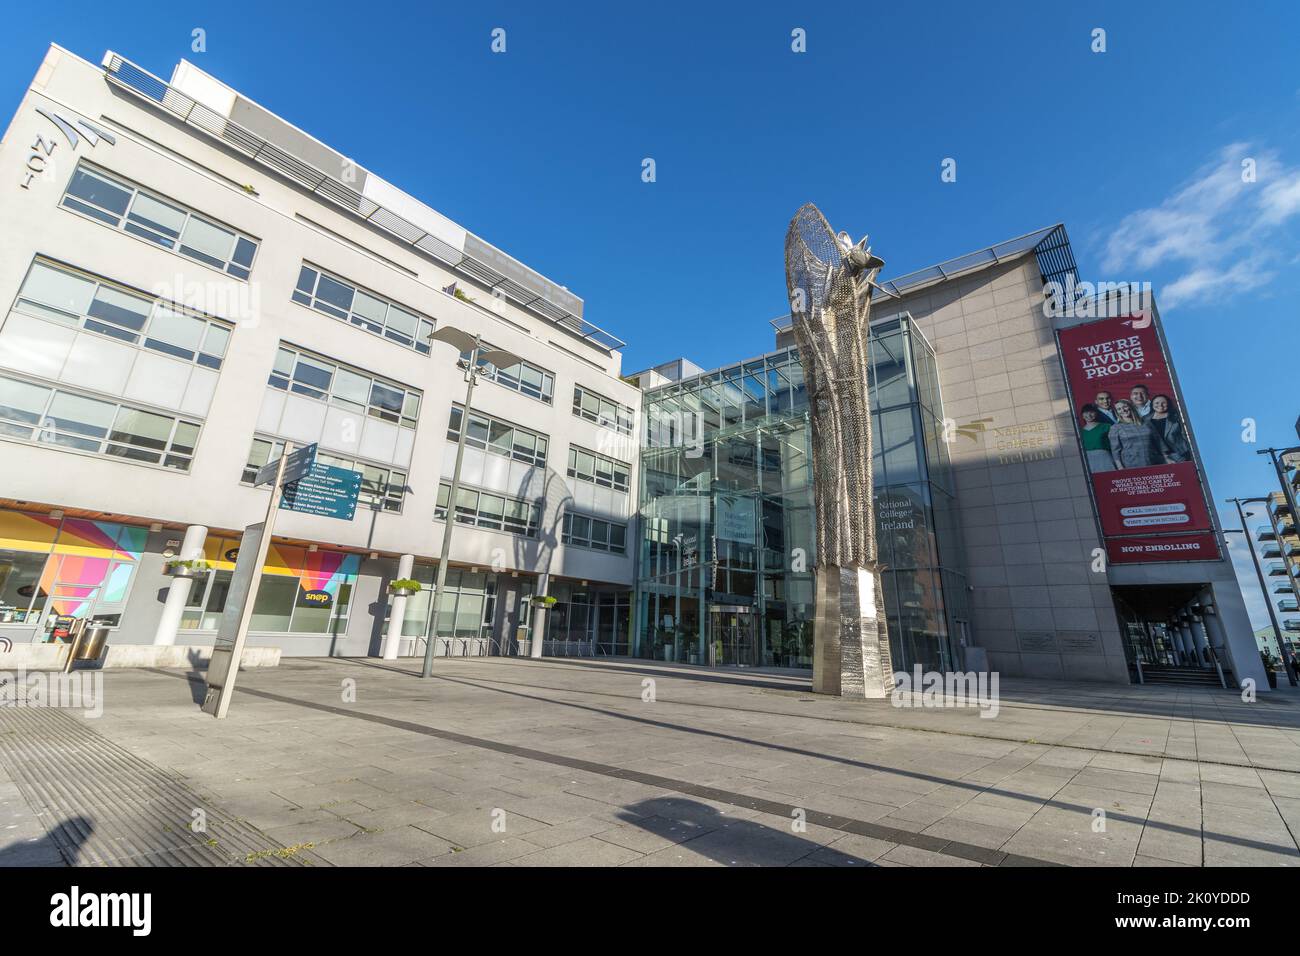 A view of the building of the National College of Ireland and the monument, Dublin, Ireland. Stock Photo